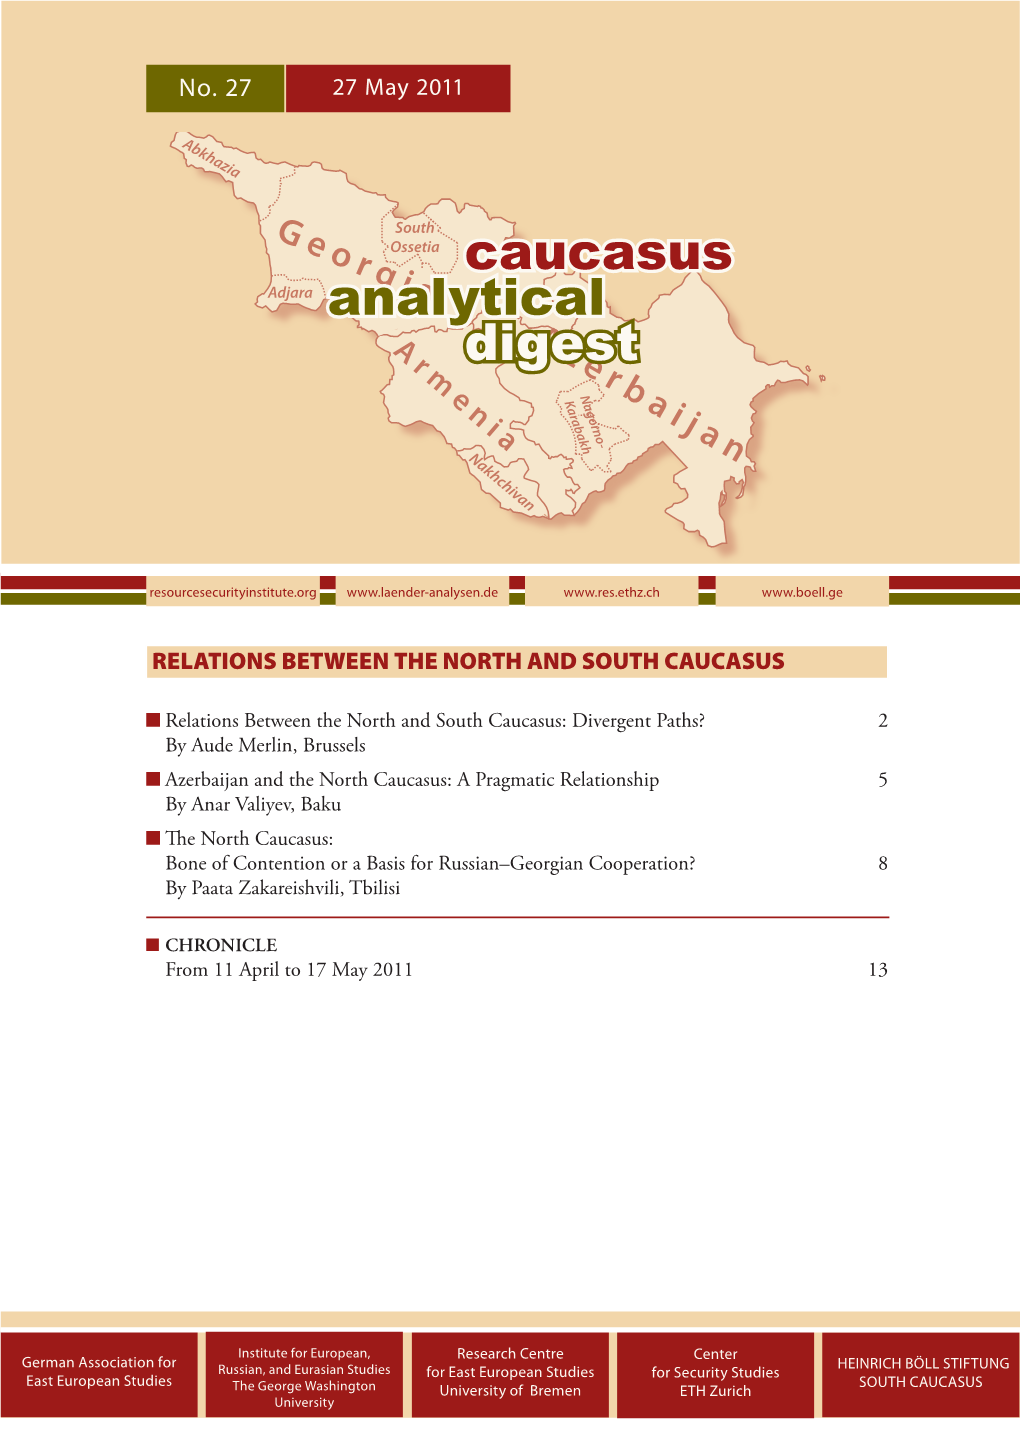 No. 27: Relations Between the North and South Caucasus